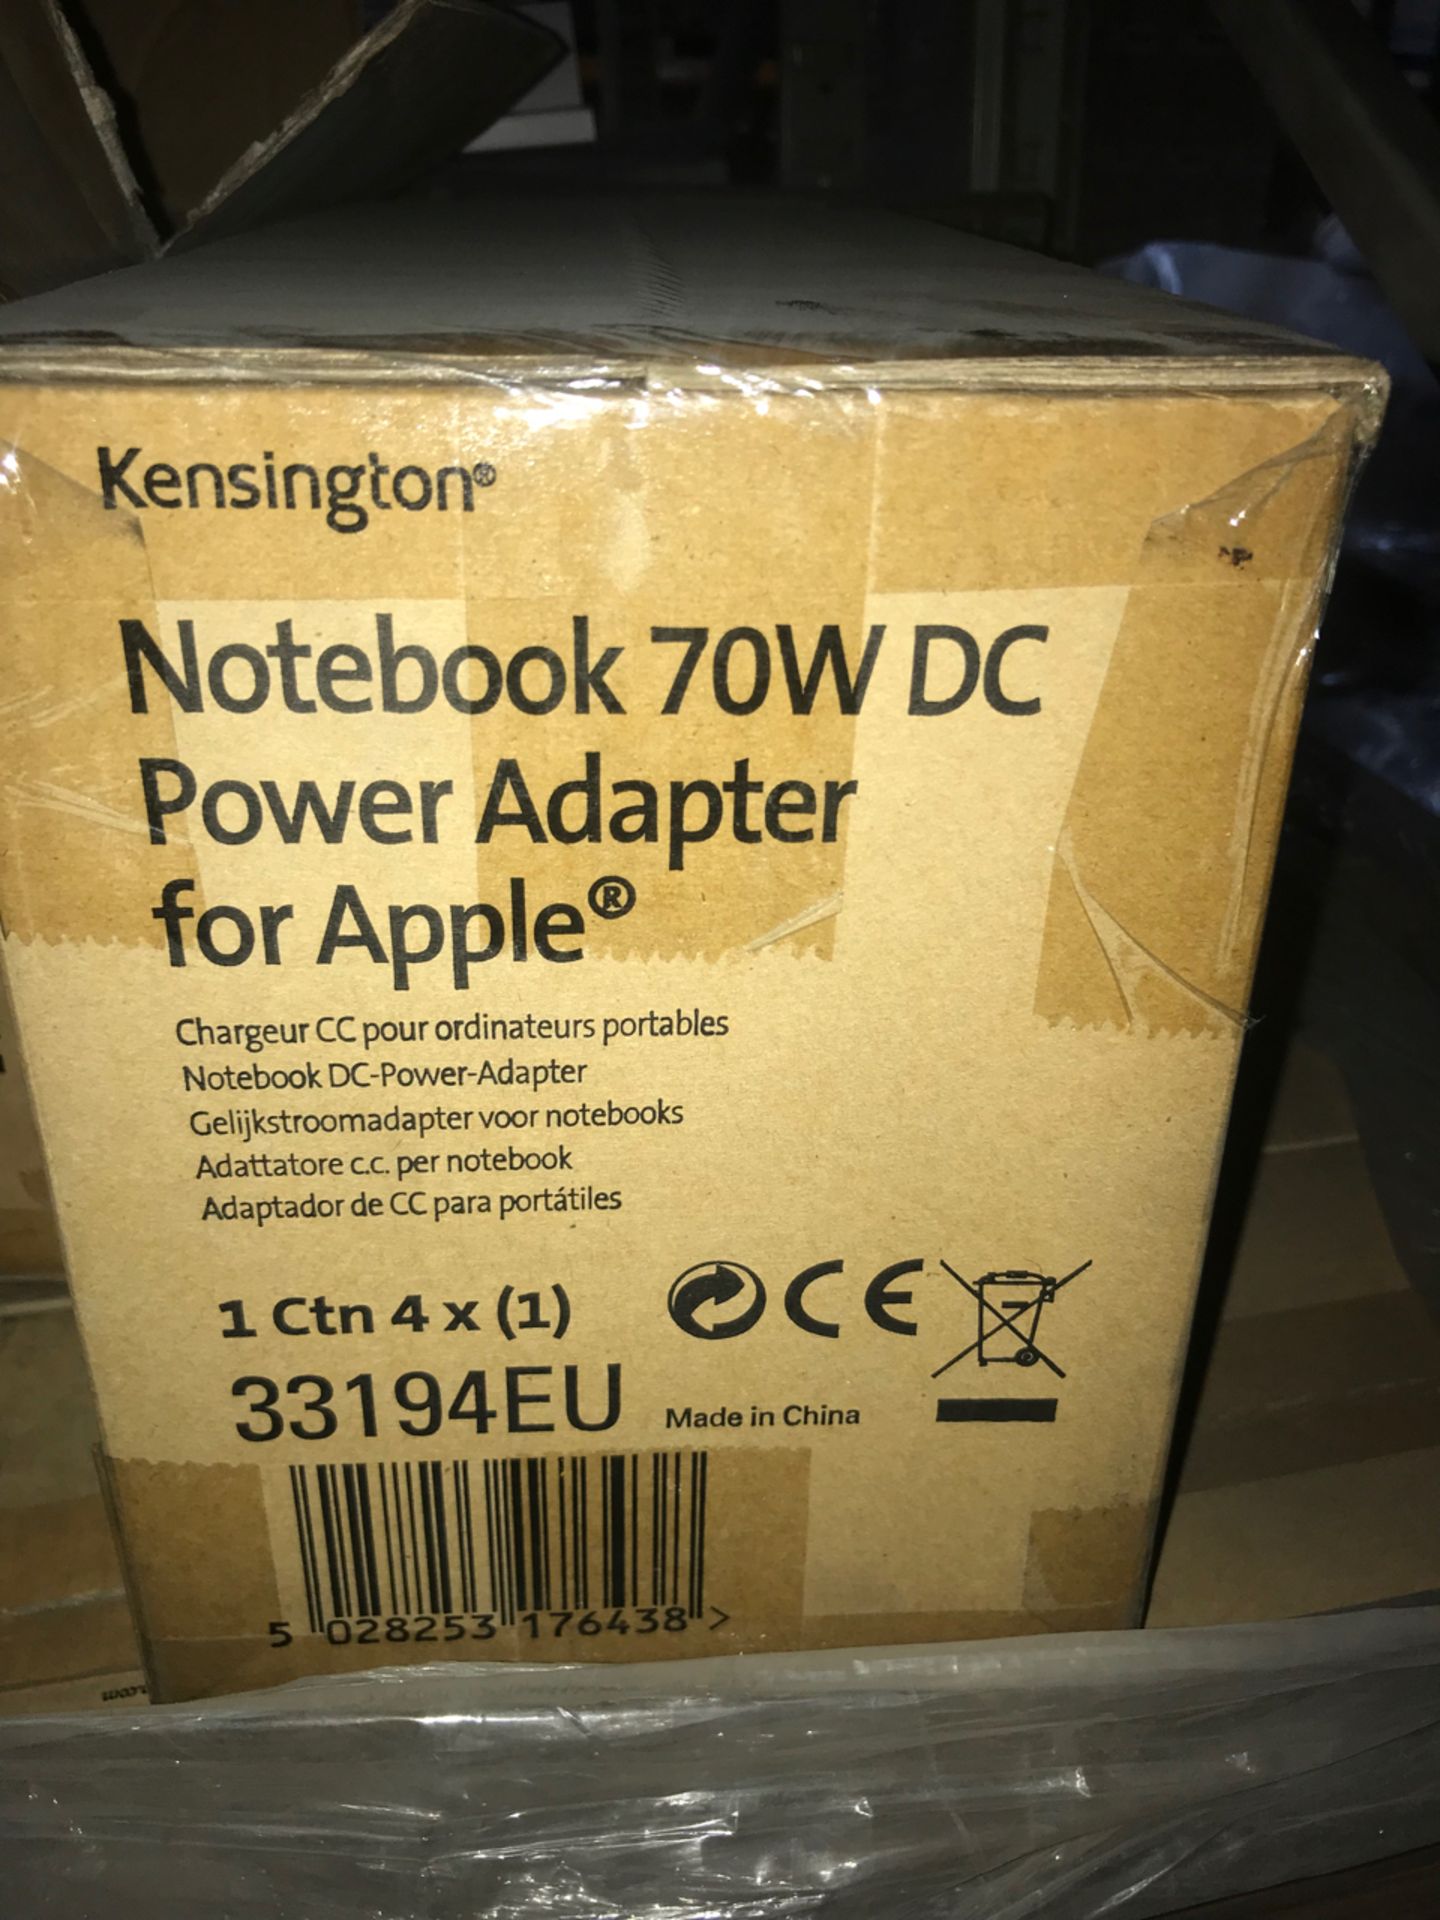 Pallet No- 14 - 72 Boxes Of Kensington Notebook 70w DC Power Adapter For Apple. 4 Per Carton - Image 2 of 3